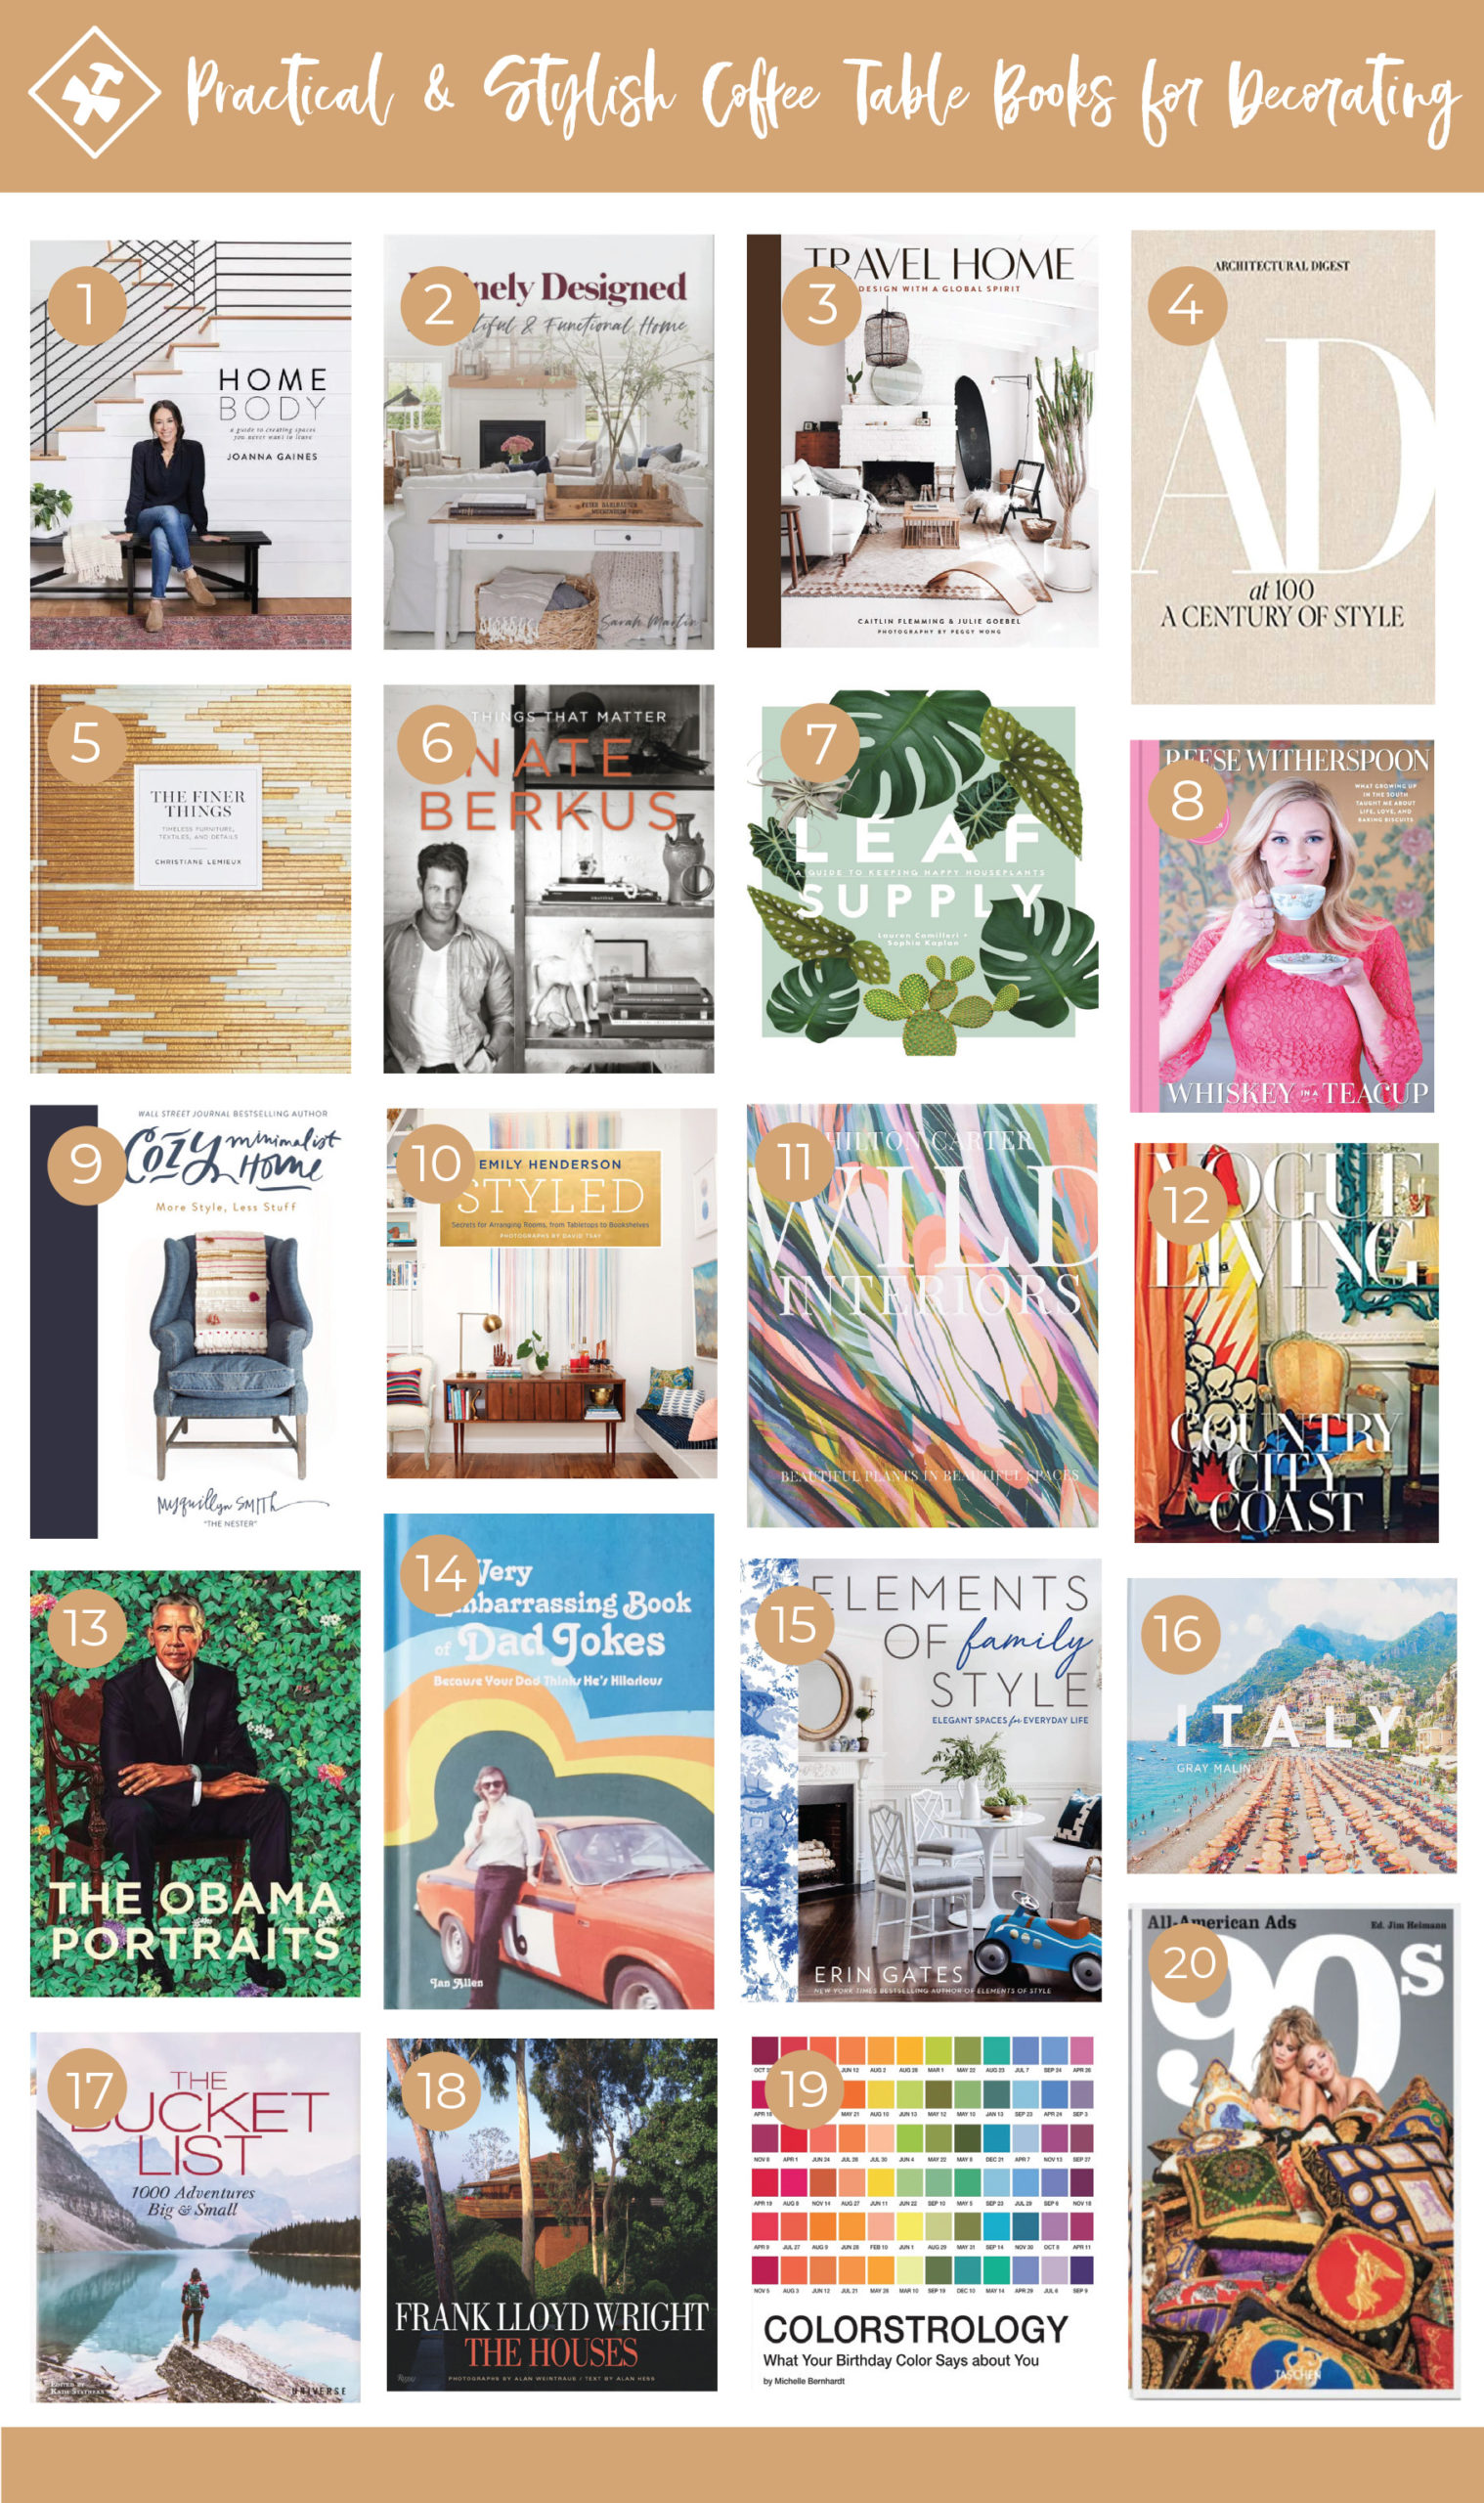 Practical & Stylish Coffee Table Books for Decorating